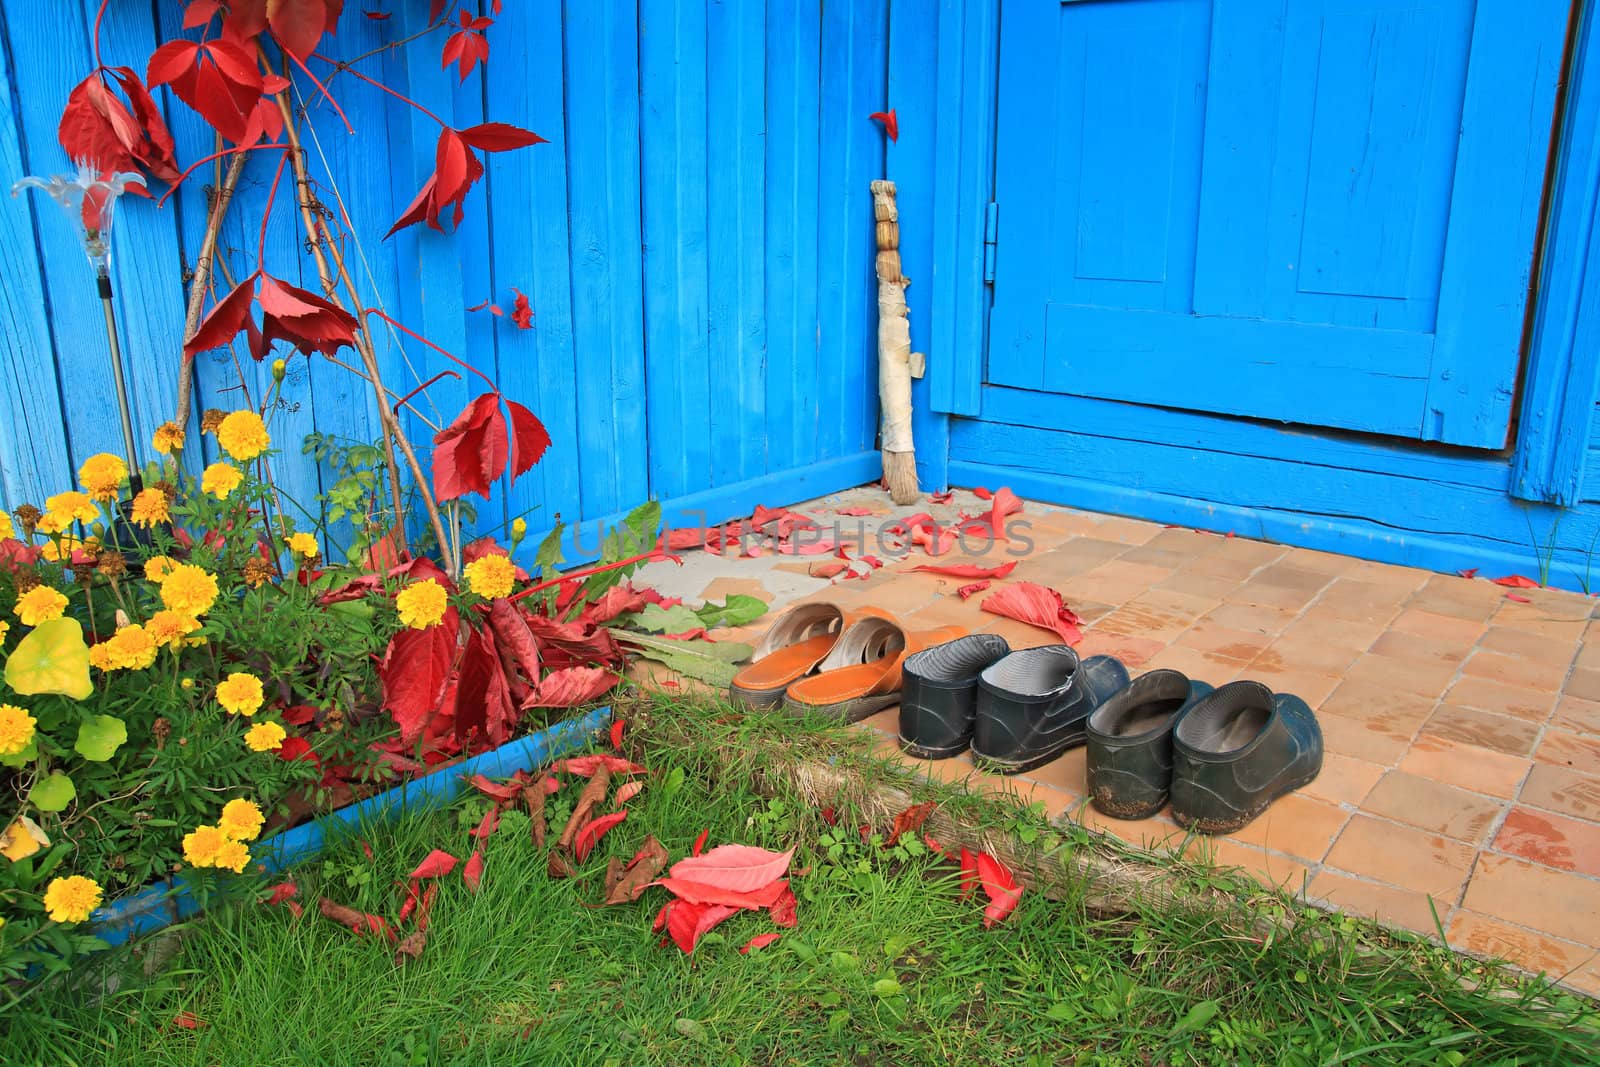 aging footwear on porch of the rural building by basel101658